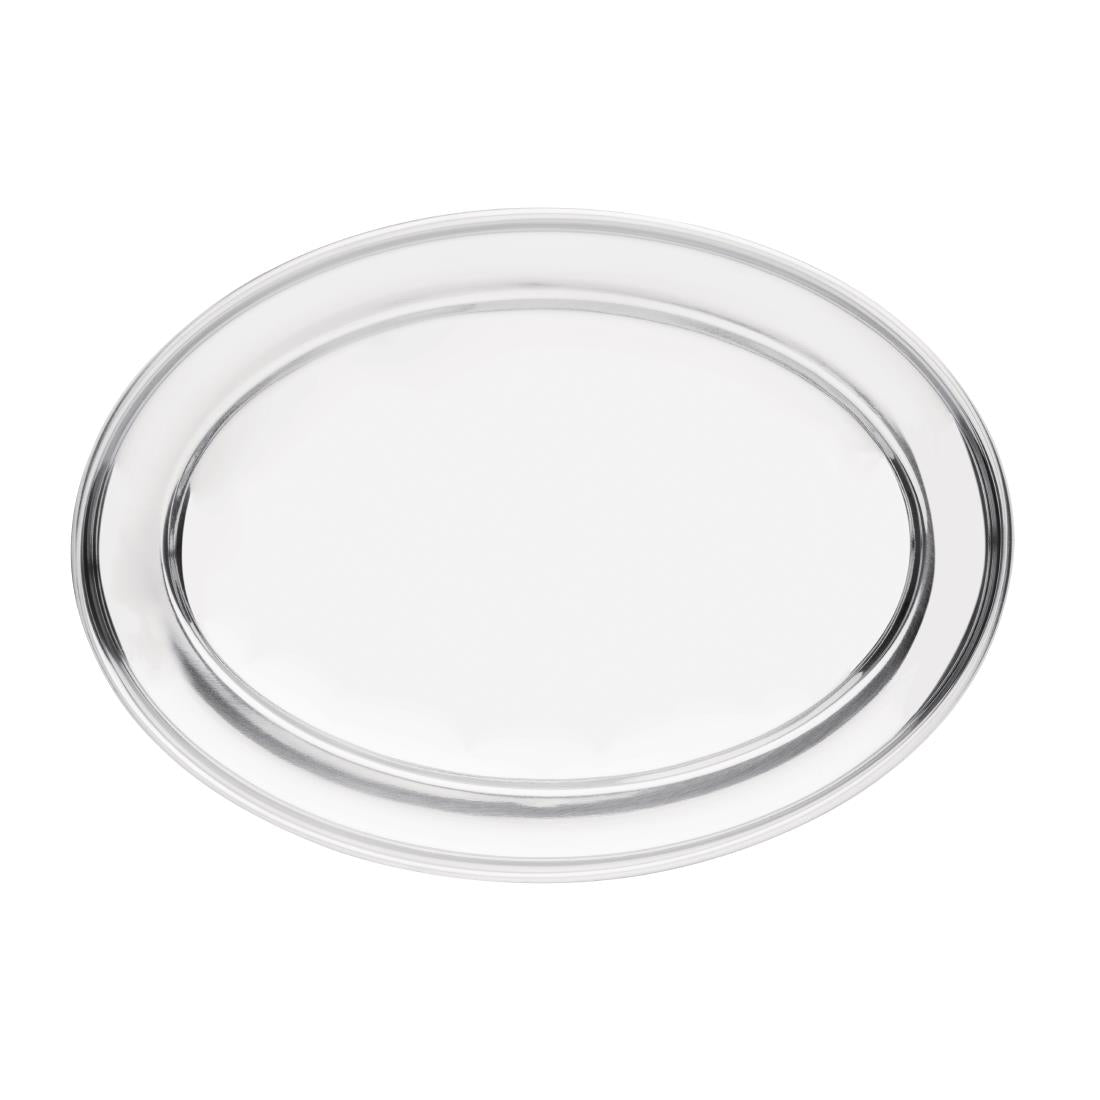 Olympia Stainless Steel Oval Serving Tray 400mm K365